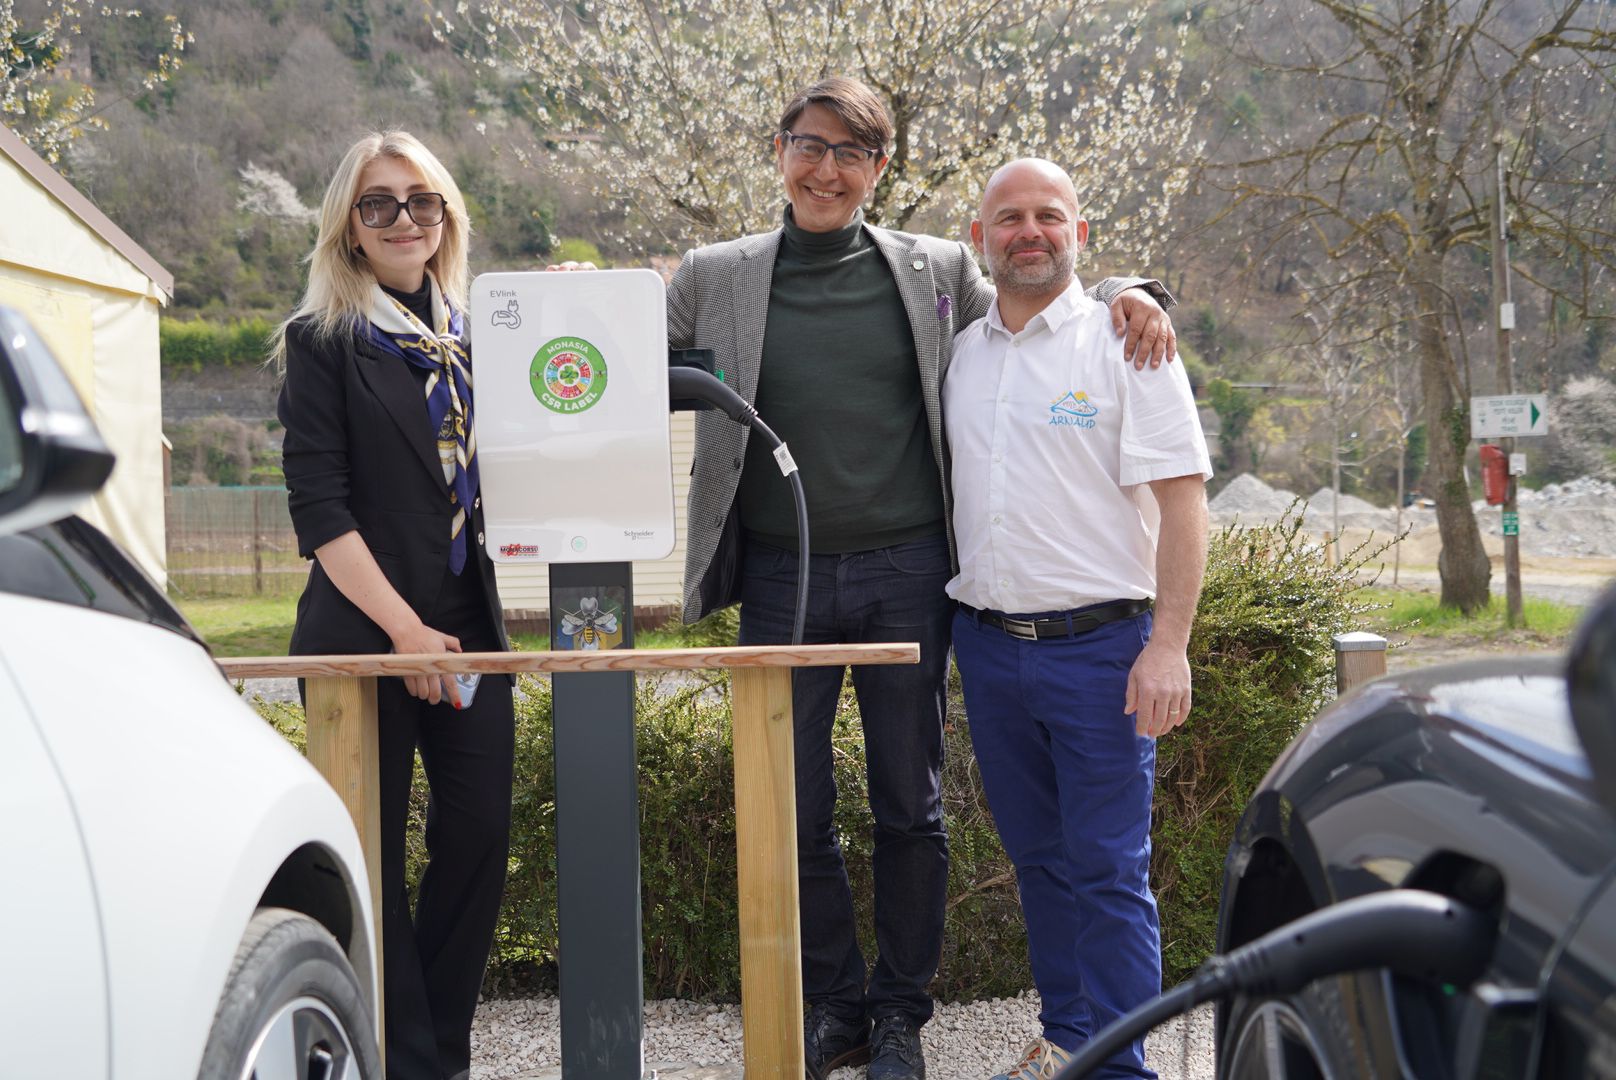 Power to the plug-ins celebrated at the Camping Les Templiers made possible by Lepton Charity Foundation with a media support of MonAsia Association picture